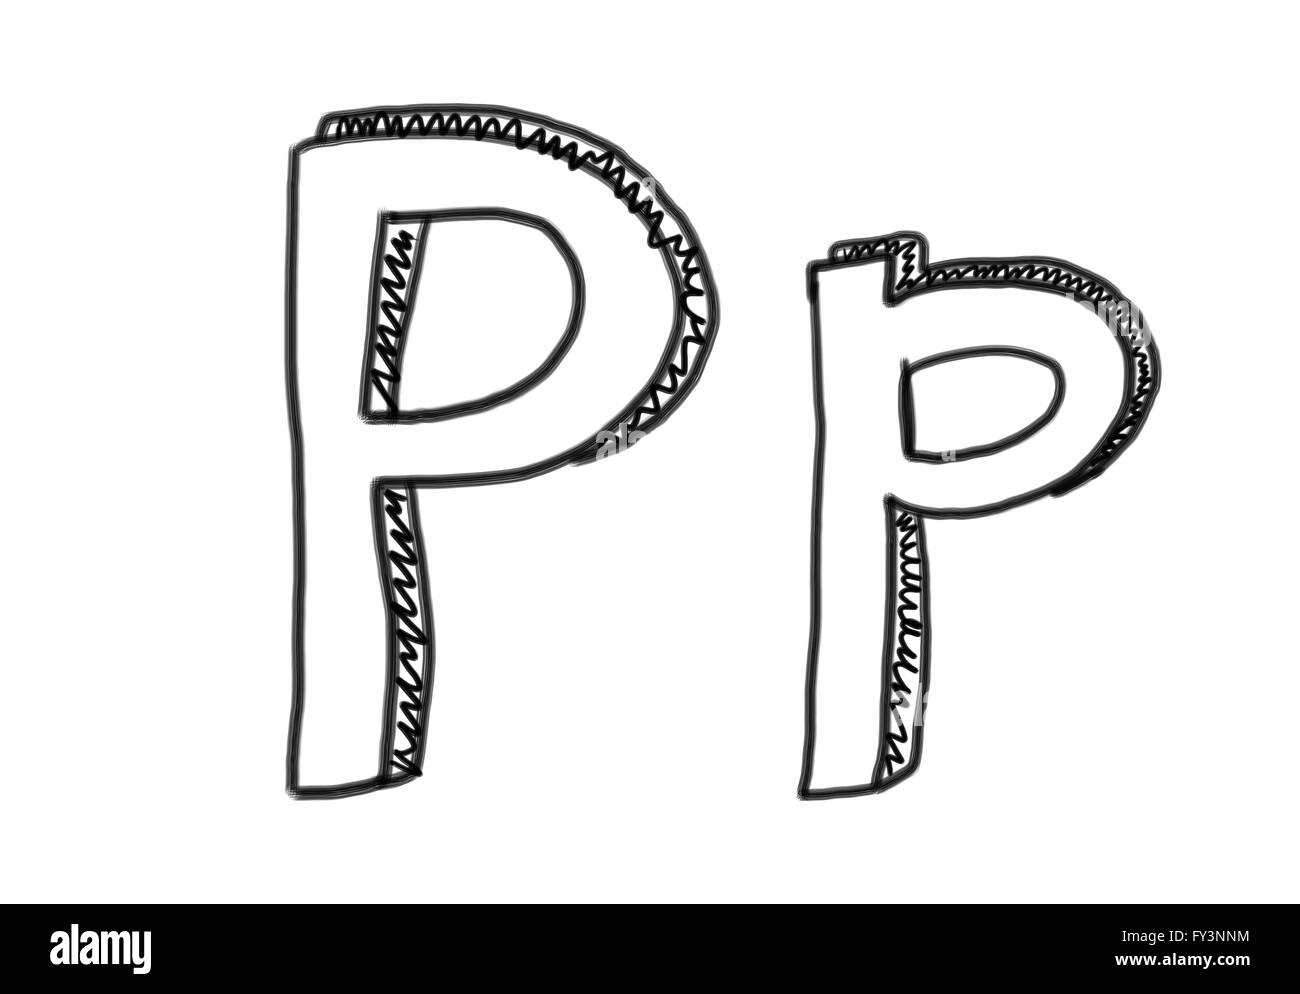 New drawing Character P of alphabet logo icon in design elements. Stock Photo